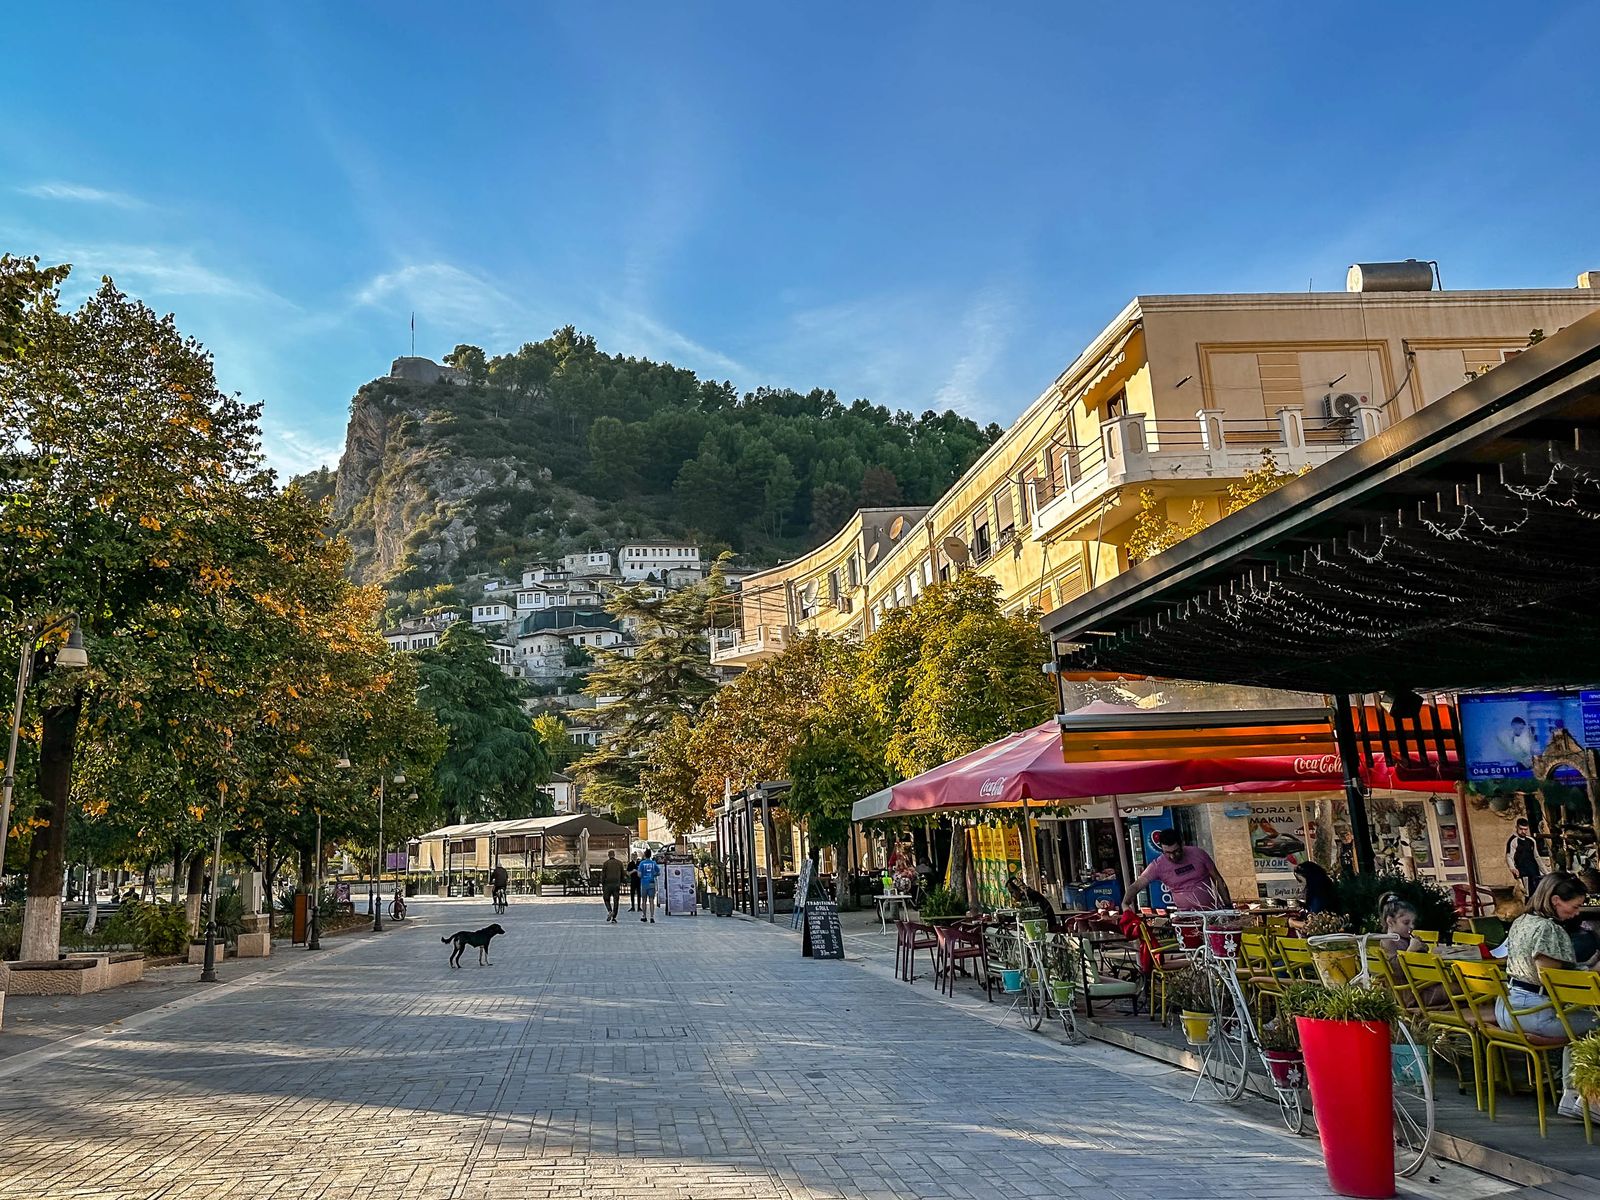 Things to see in berat Albania in one day